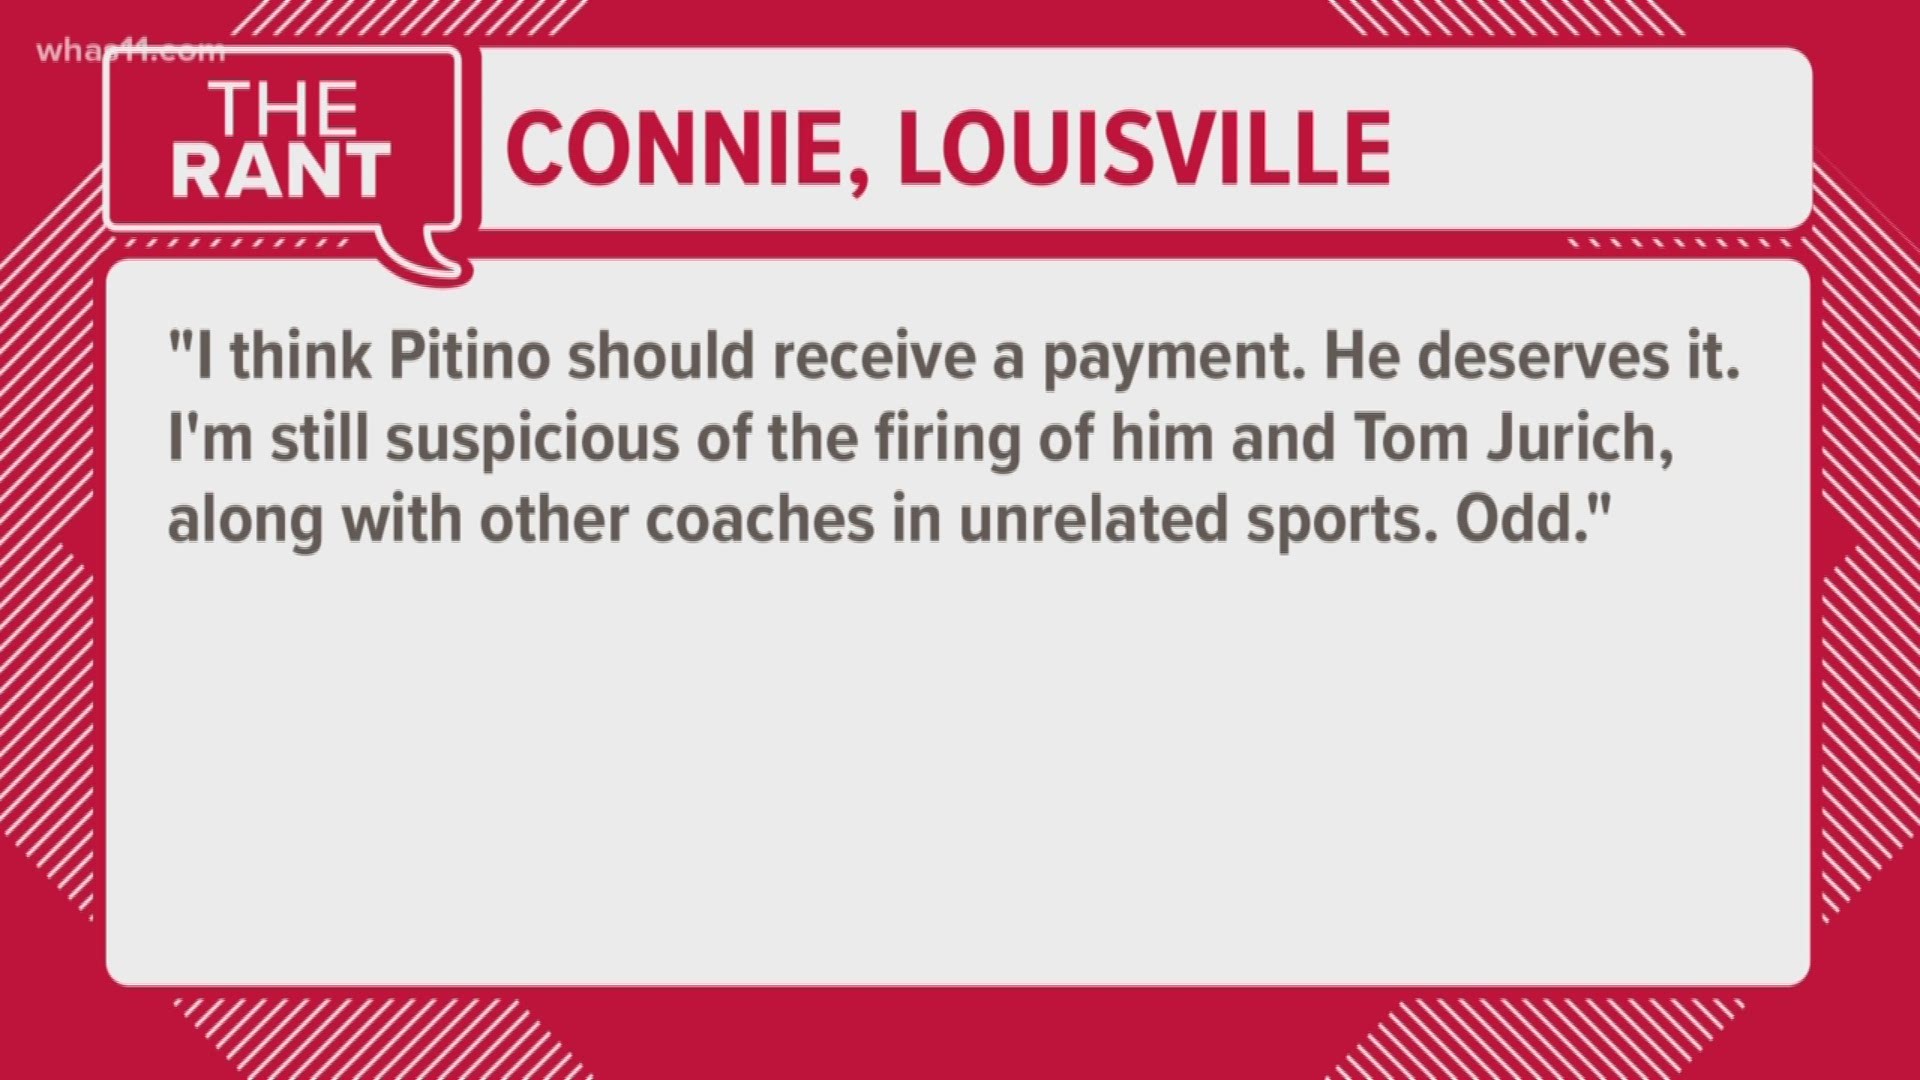 Pitino made his first public appearance in Louisville since his firing, and the rant line is fired up.